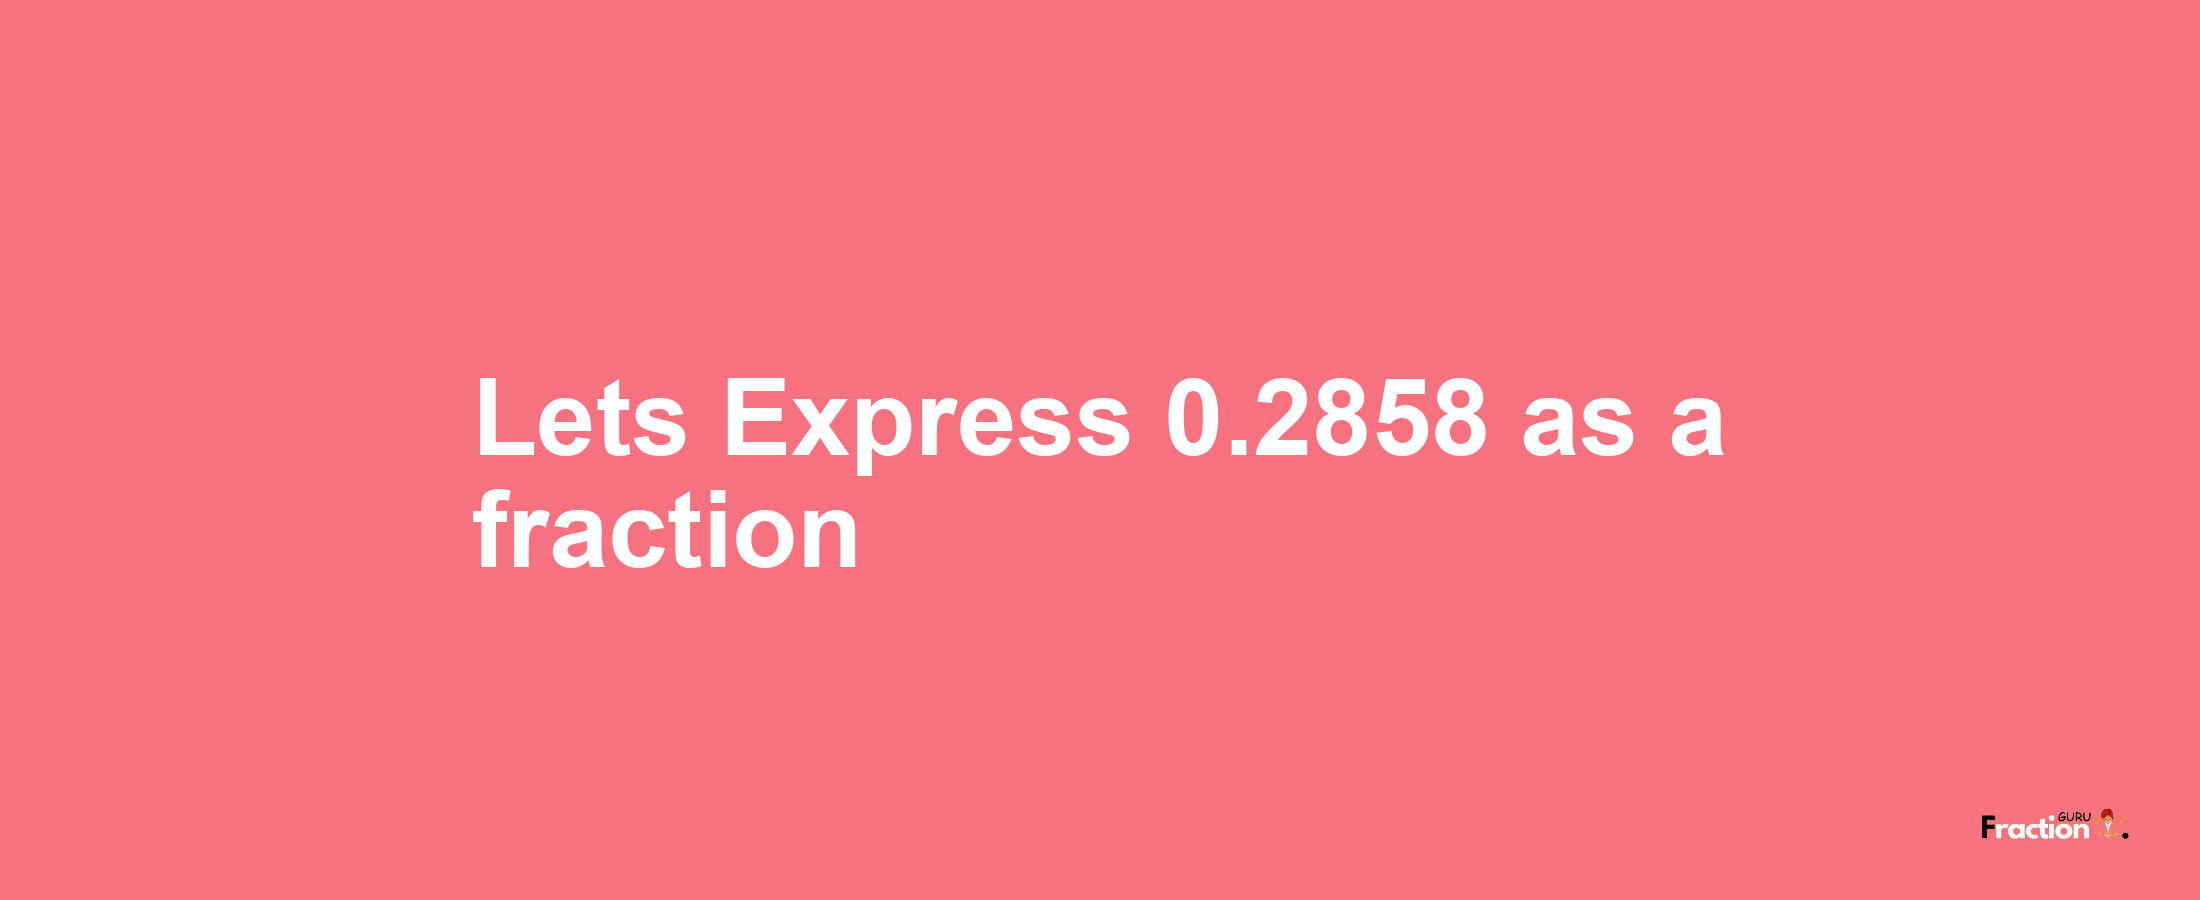 Lets Express 0.2858 as afraction